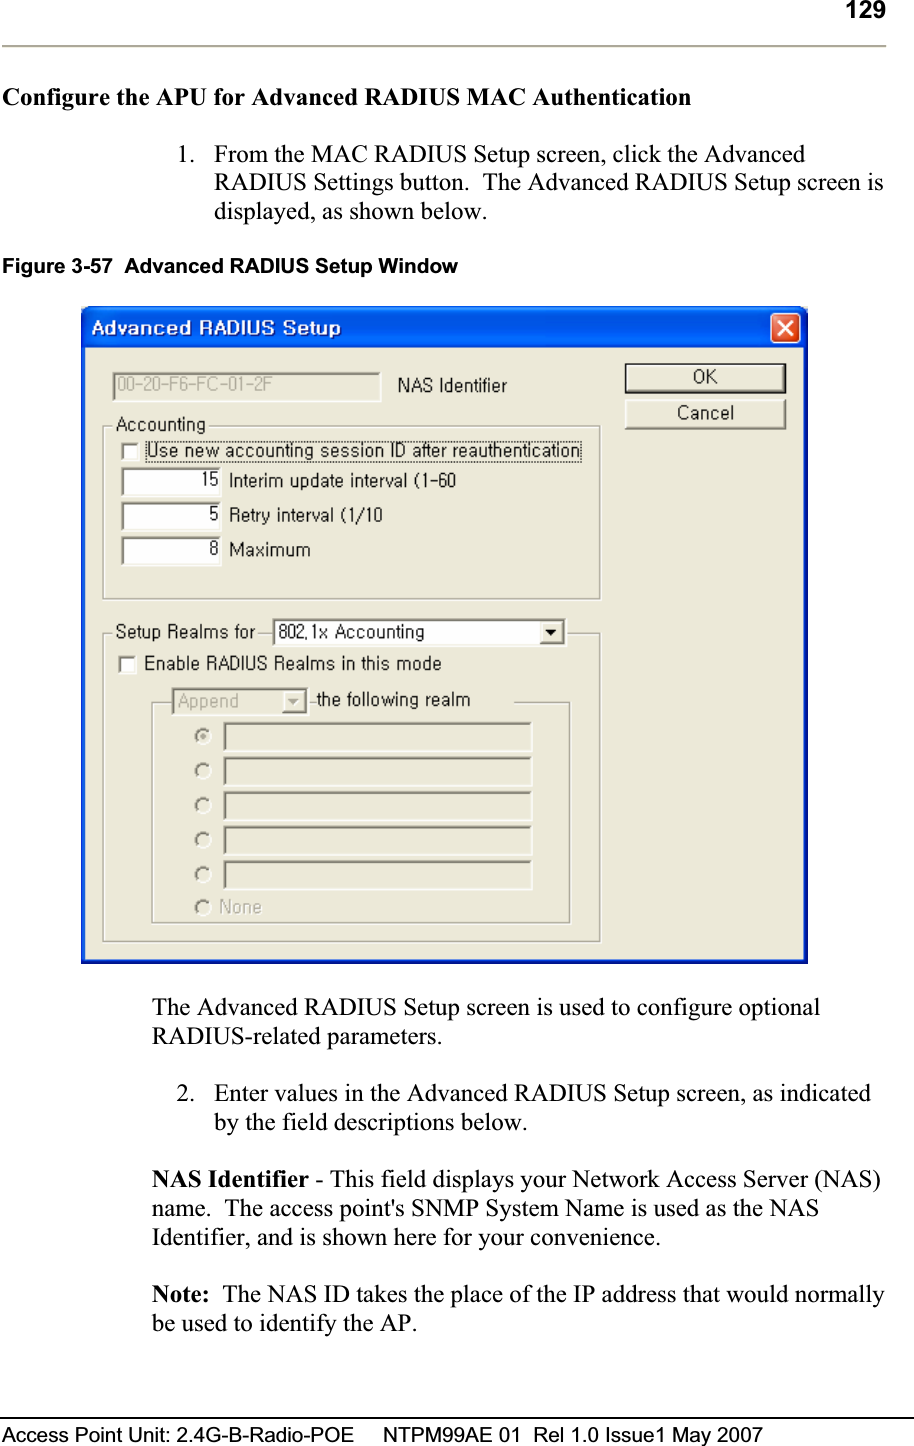 129Access Point Unit: 2.4G-B-Radio-POE     NTPM99AE 01  Rel 1.0 Issue1 May 2007 Configure the APU for Advanced RADIUS MAC Authentication 1. From the MAC RADIUS Setup screen, click the Advanced RADIUS Settings button.  The Advanced RADIUS Setup screen is displayed, as shown below. Figure 3-57  Advanced RADIUS Setup Window The Advanced RADIUS Setup screen is used to configure optional RADIUS-related parameters. 2. Enter values in the Advanced RADIUS Setup screen, as indicated by the field descriptions below. NAS Identifier - This field displays your Network Access Server (NAS) name.  The access point&apos;s SNMP System Name is used as the NAS Identifier, and is shown here for your convenience. Note:  The NAS ID takes the place of the IP address that would normally be used to identify the AP.   